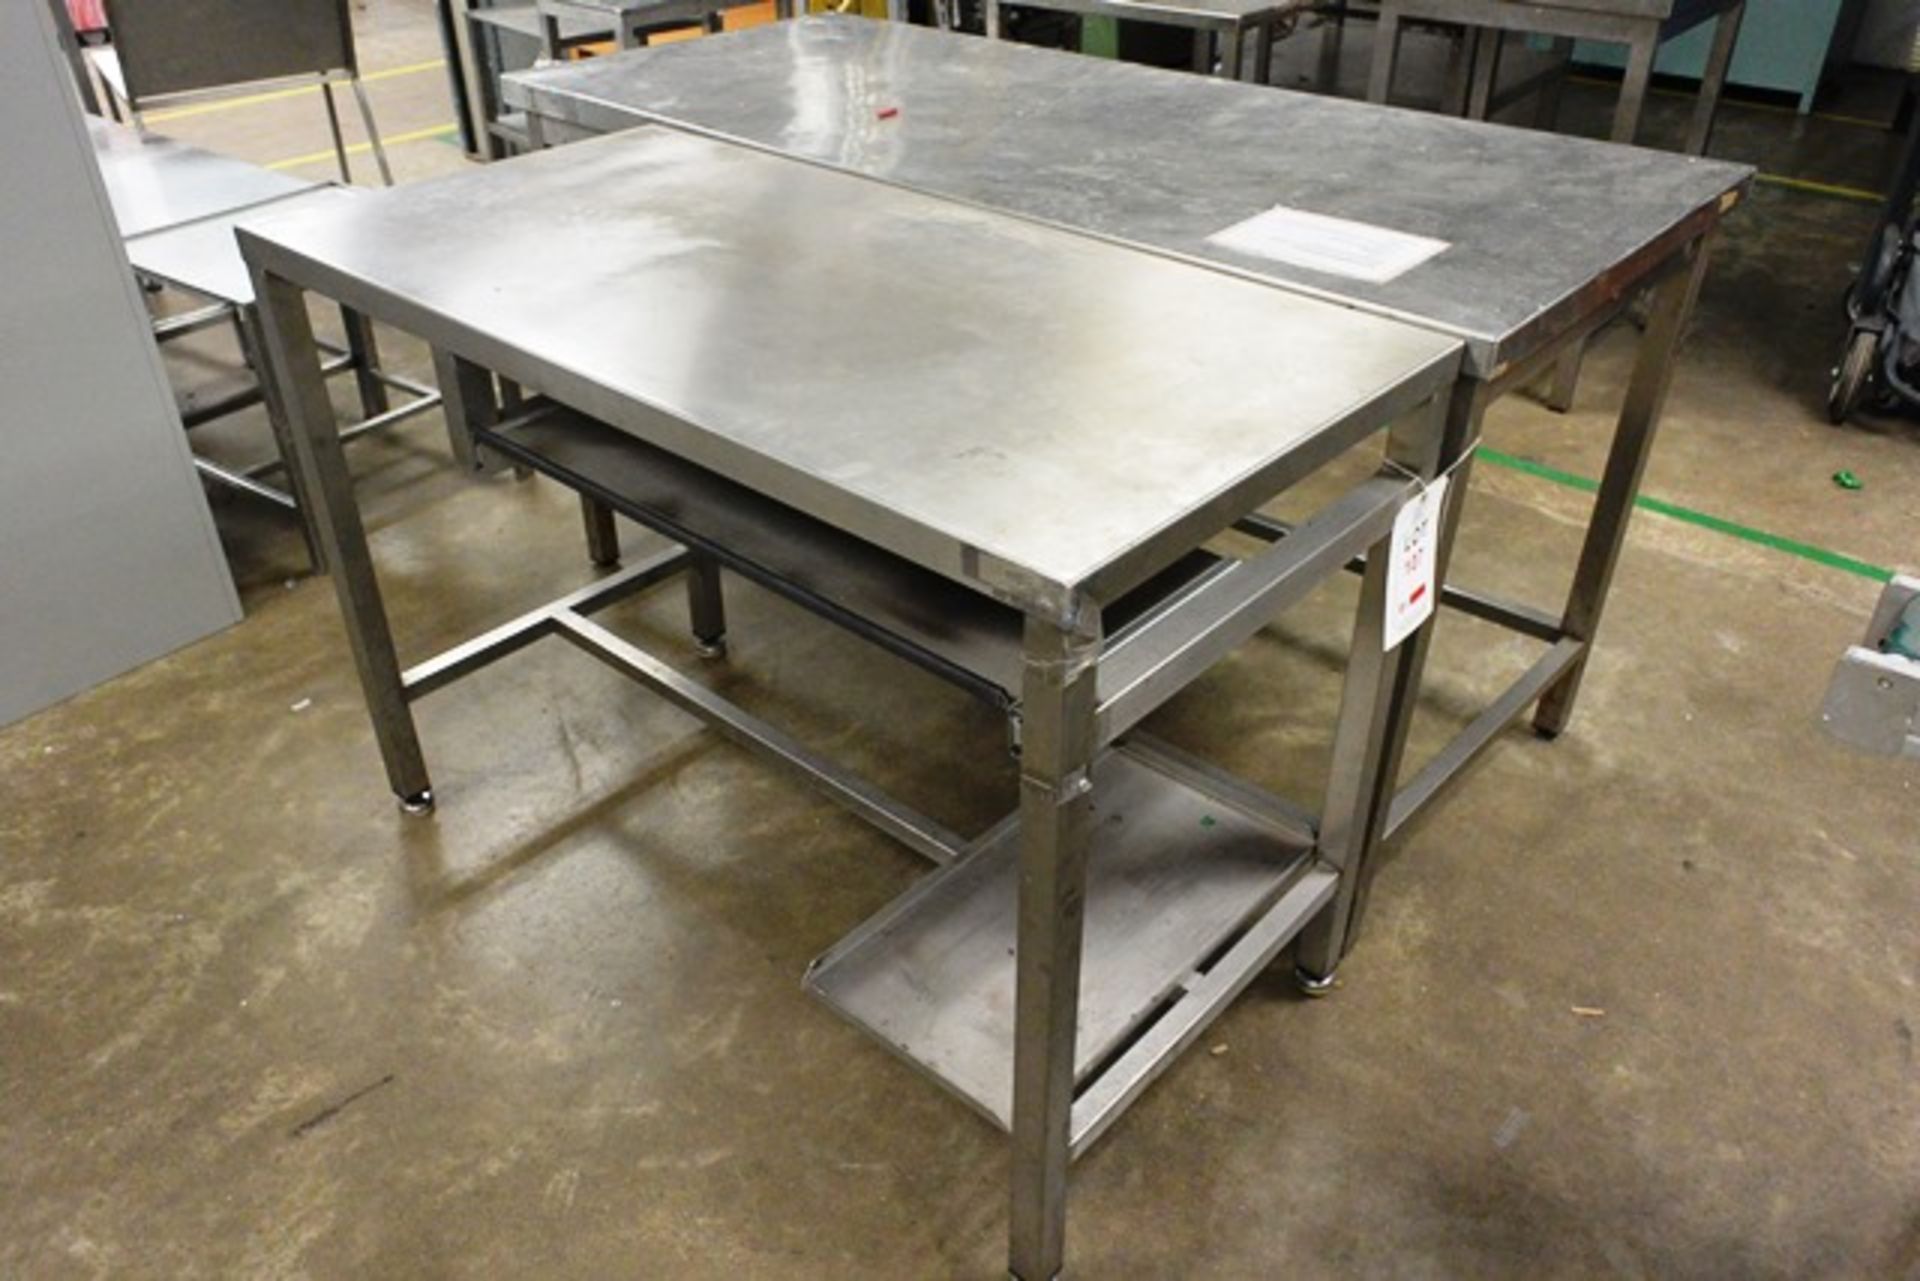 Two various stainless steel tables, approx dimensions to be confirmed shortly